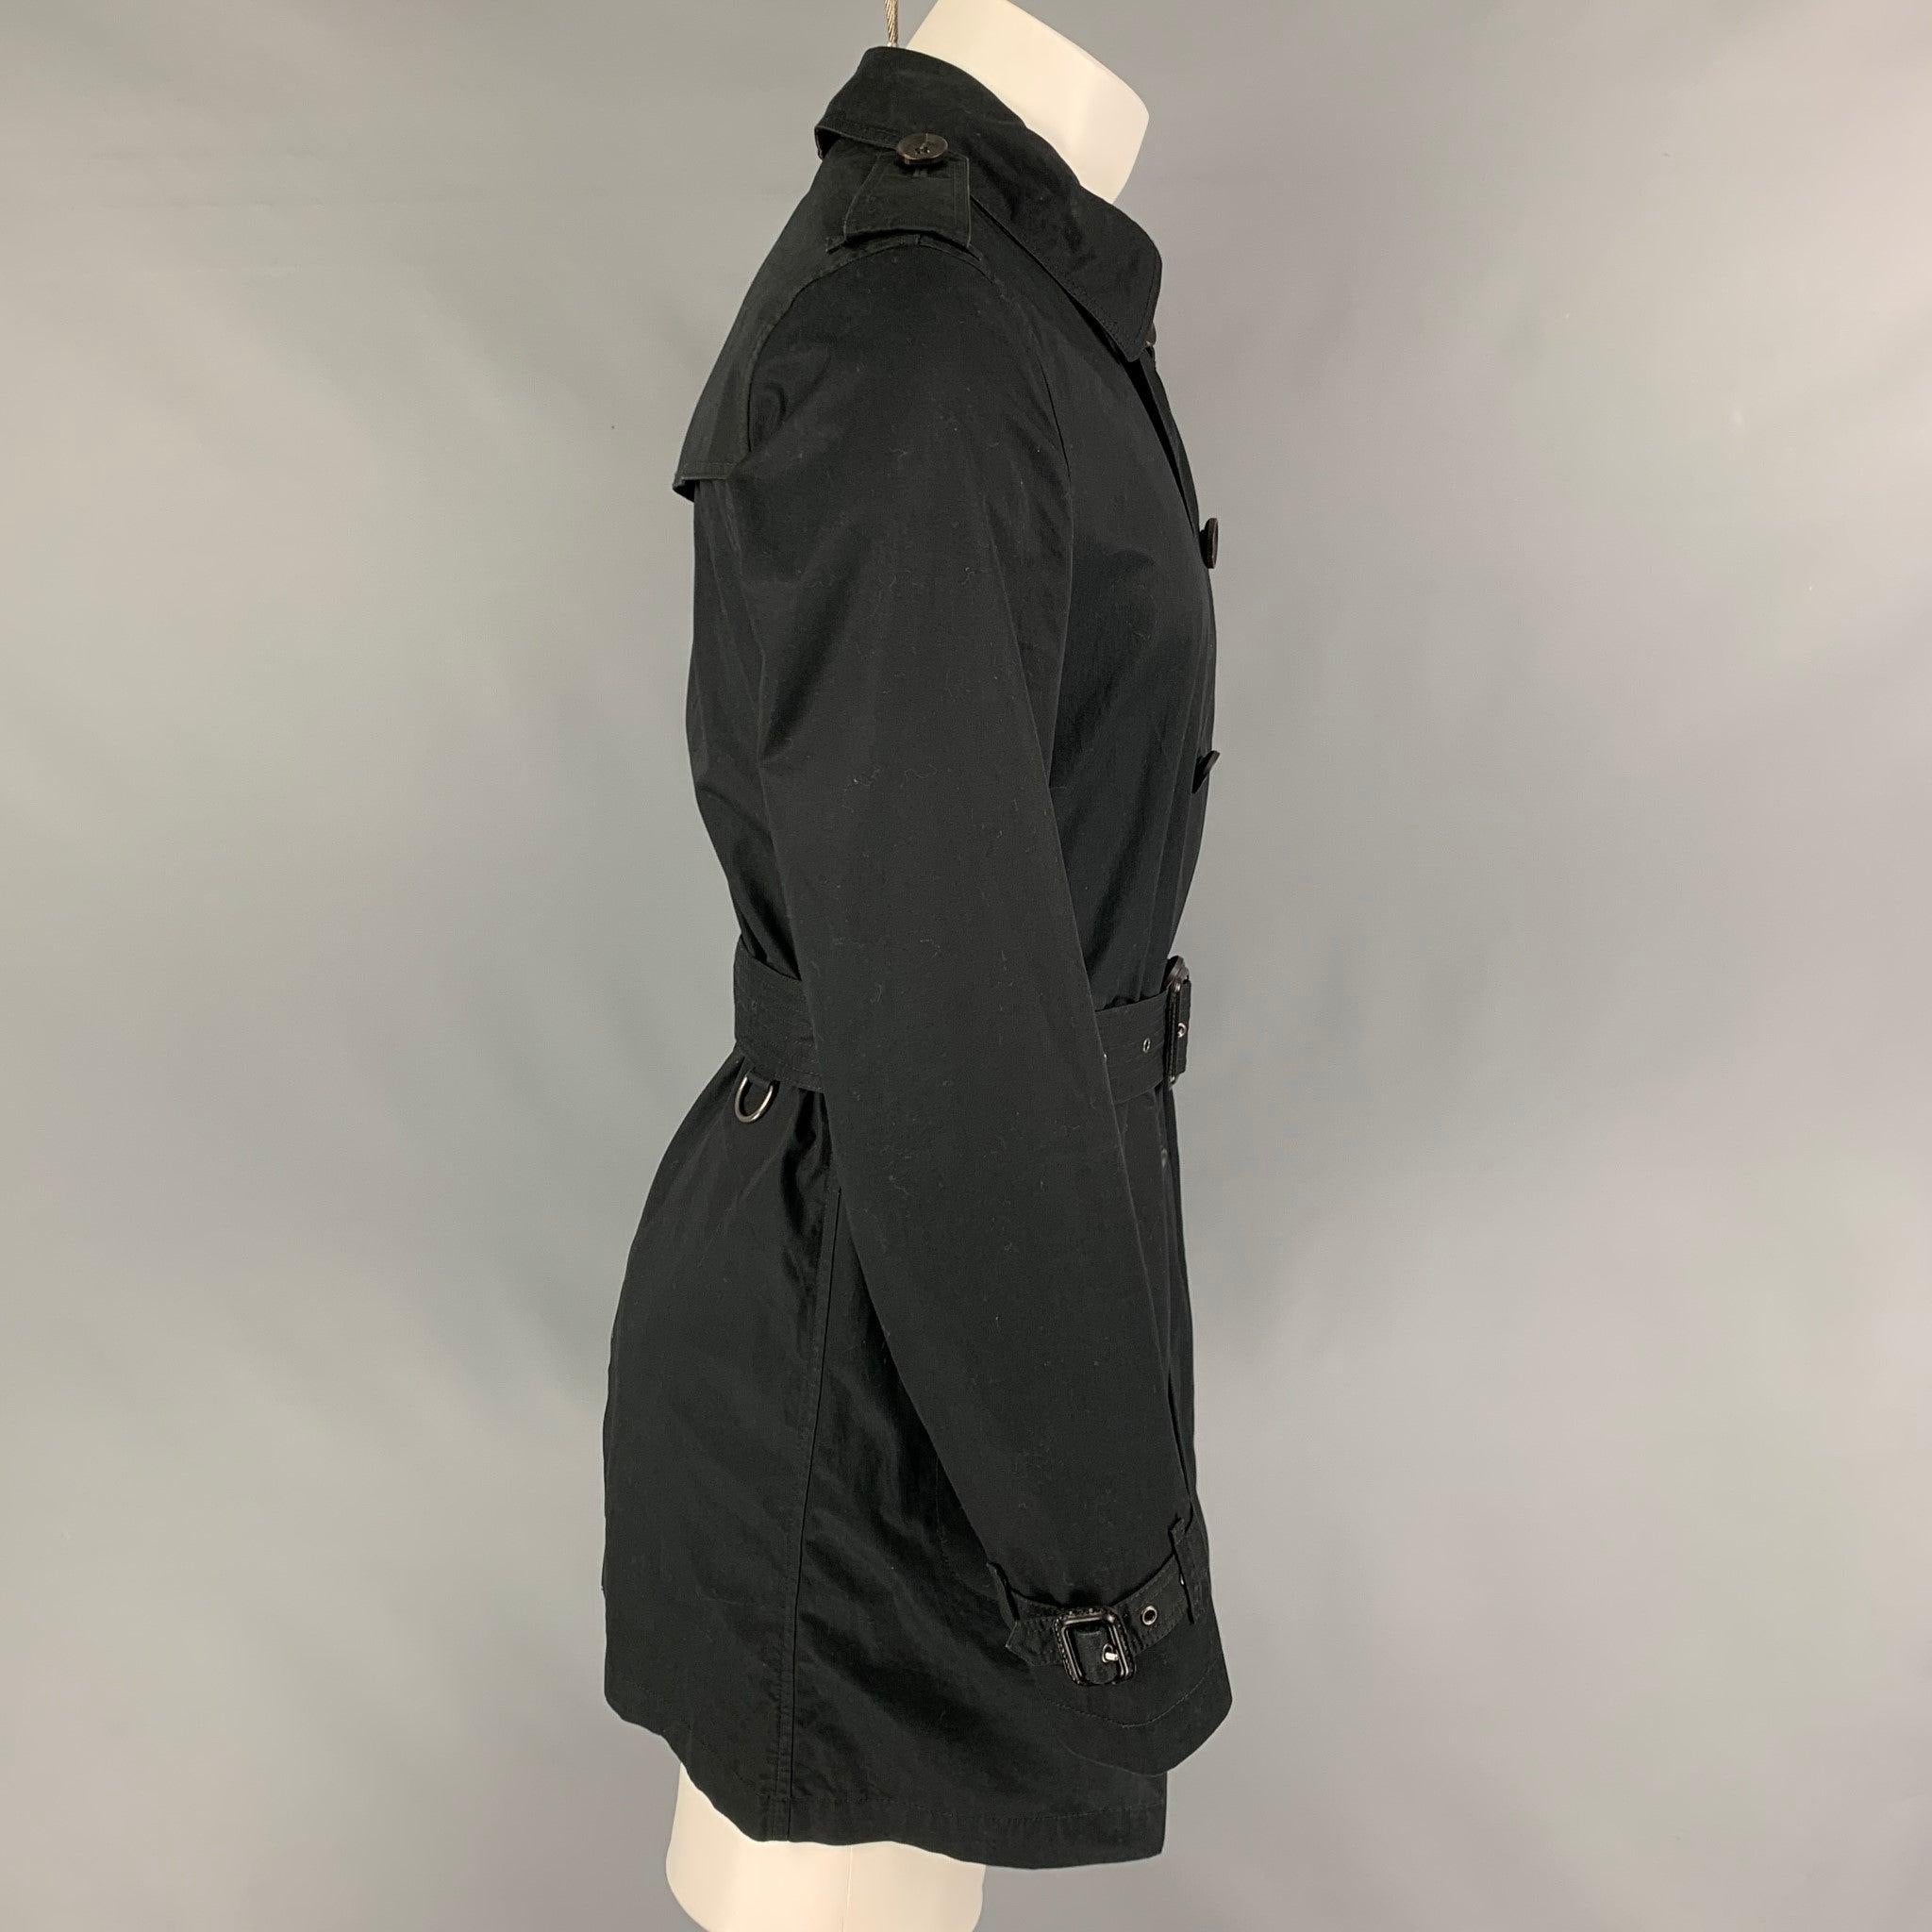 BURBERRY BRIT trench coat comes in a black cotton with a plaid liner featuring a belted style, epaulettes, front pockets, spread collar, and a zip up closure.
Very Good
Pre-Owned Condition. 

Marked:   S 

Measurements: 
 
Shoulder: 17.5 inches 